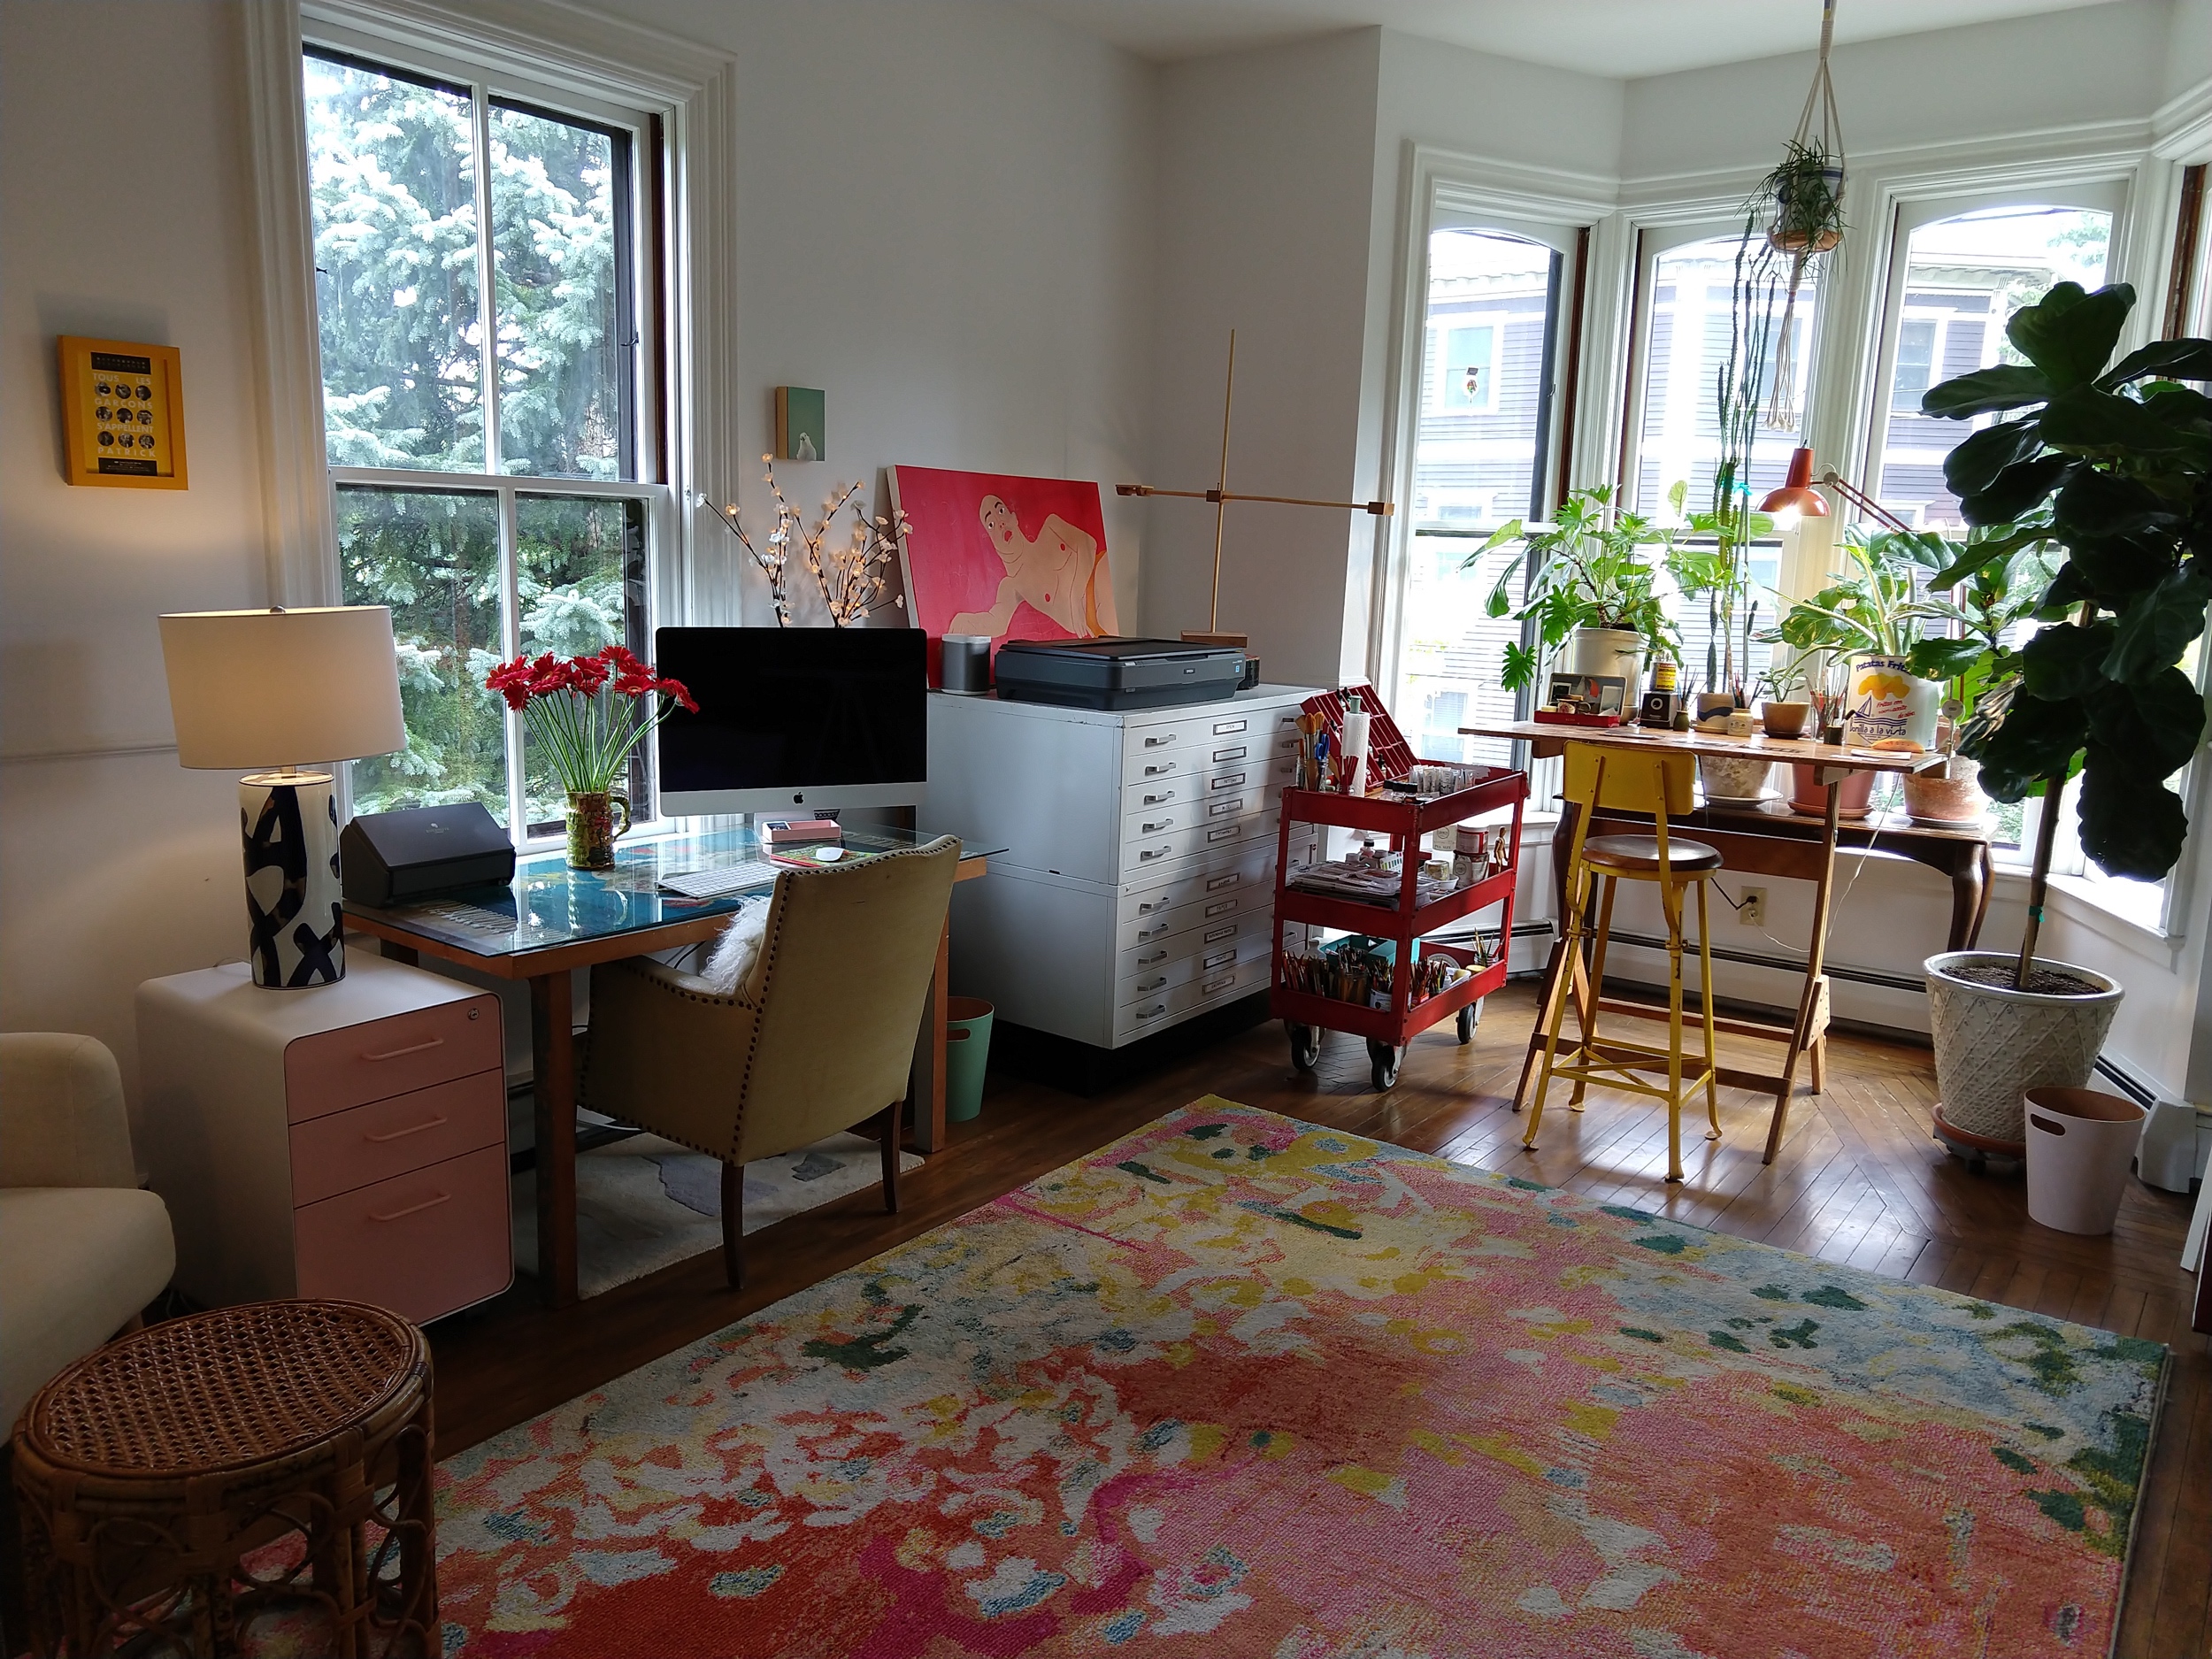  Painting studio in a Harrison Street home Photo by Jessica Jennings 